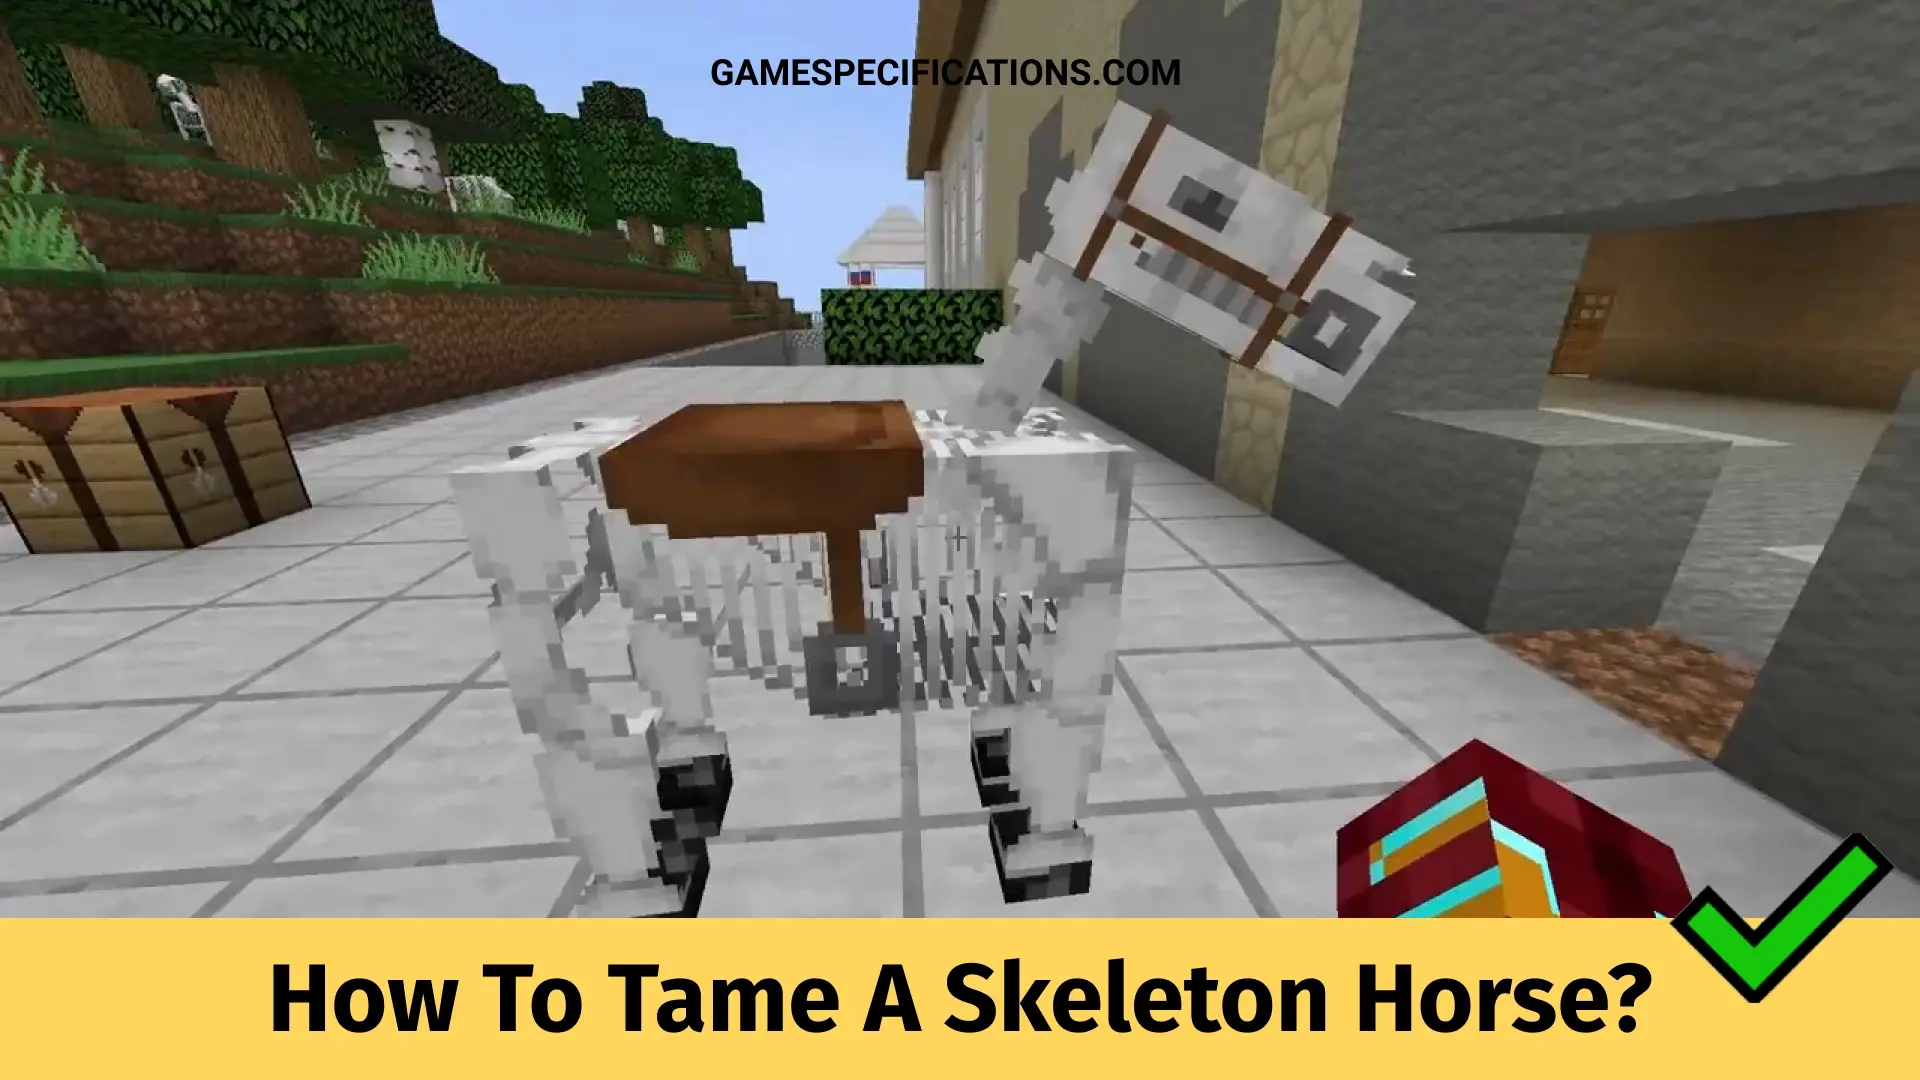 How To Tame A Skeleton Horse In Minecraft Game Specifications